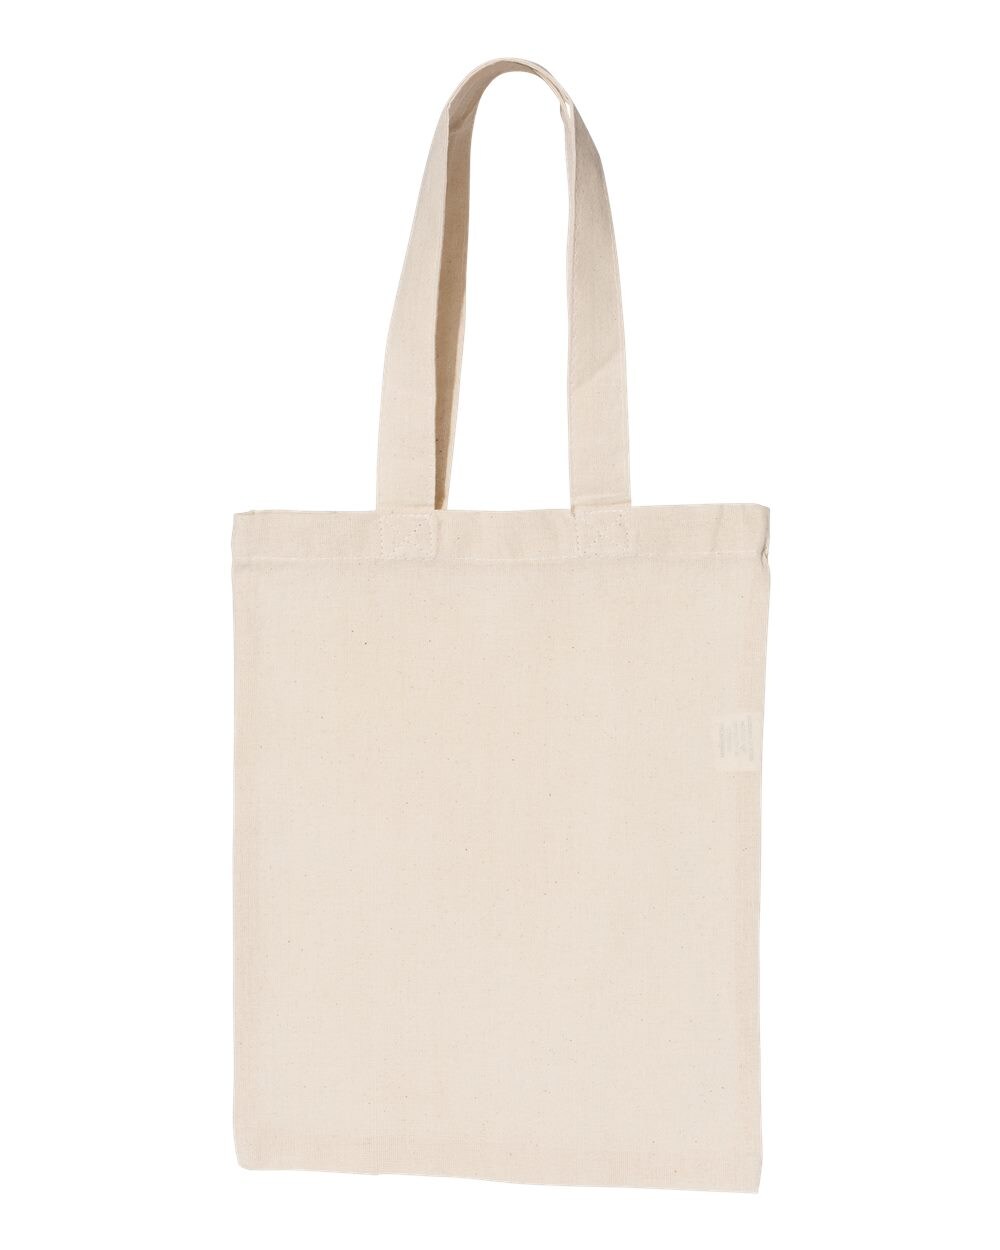 Premium Tote Bags Medium | 6 Oz./yd ², 100% cotton canvas Totes for Every Outfit | MINA®